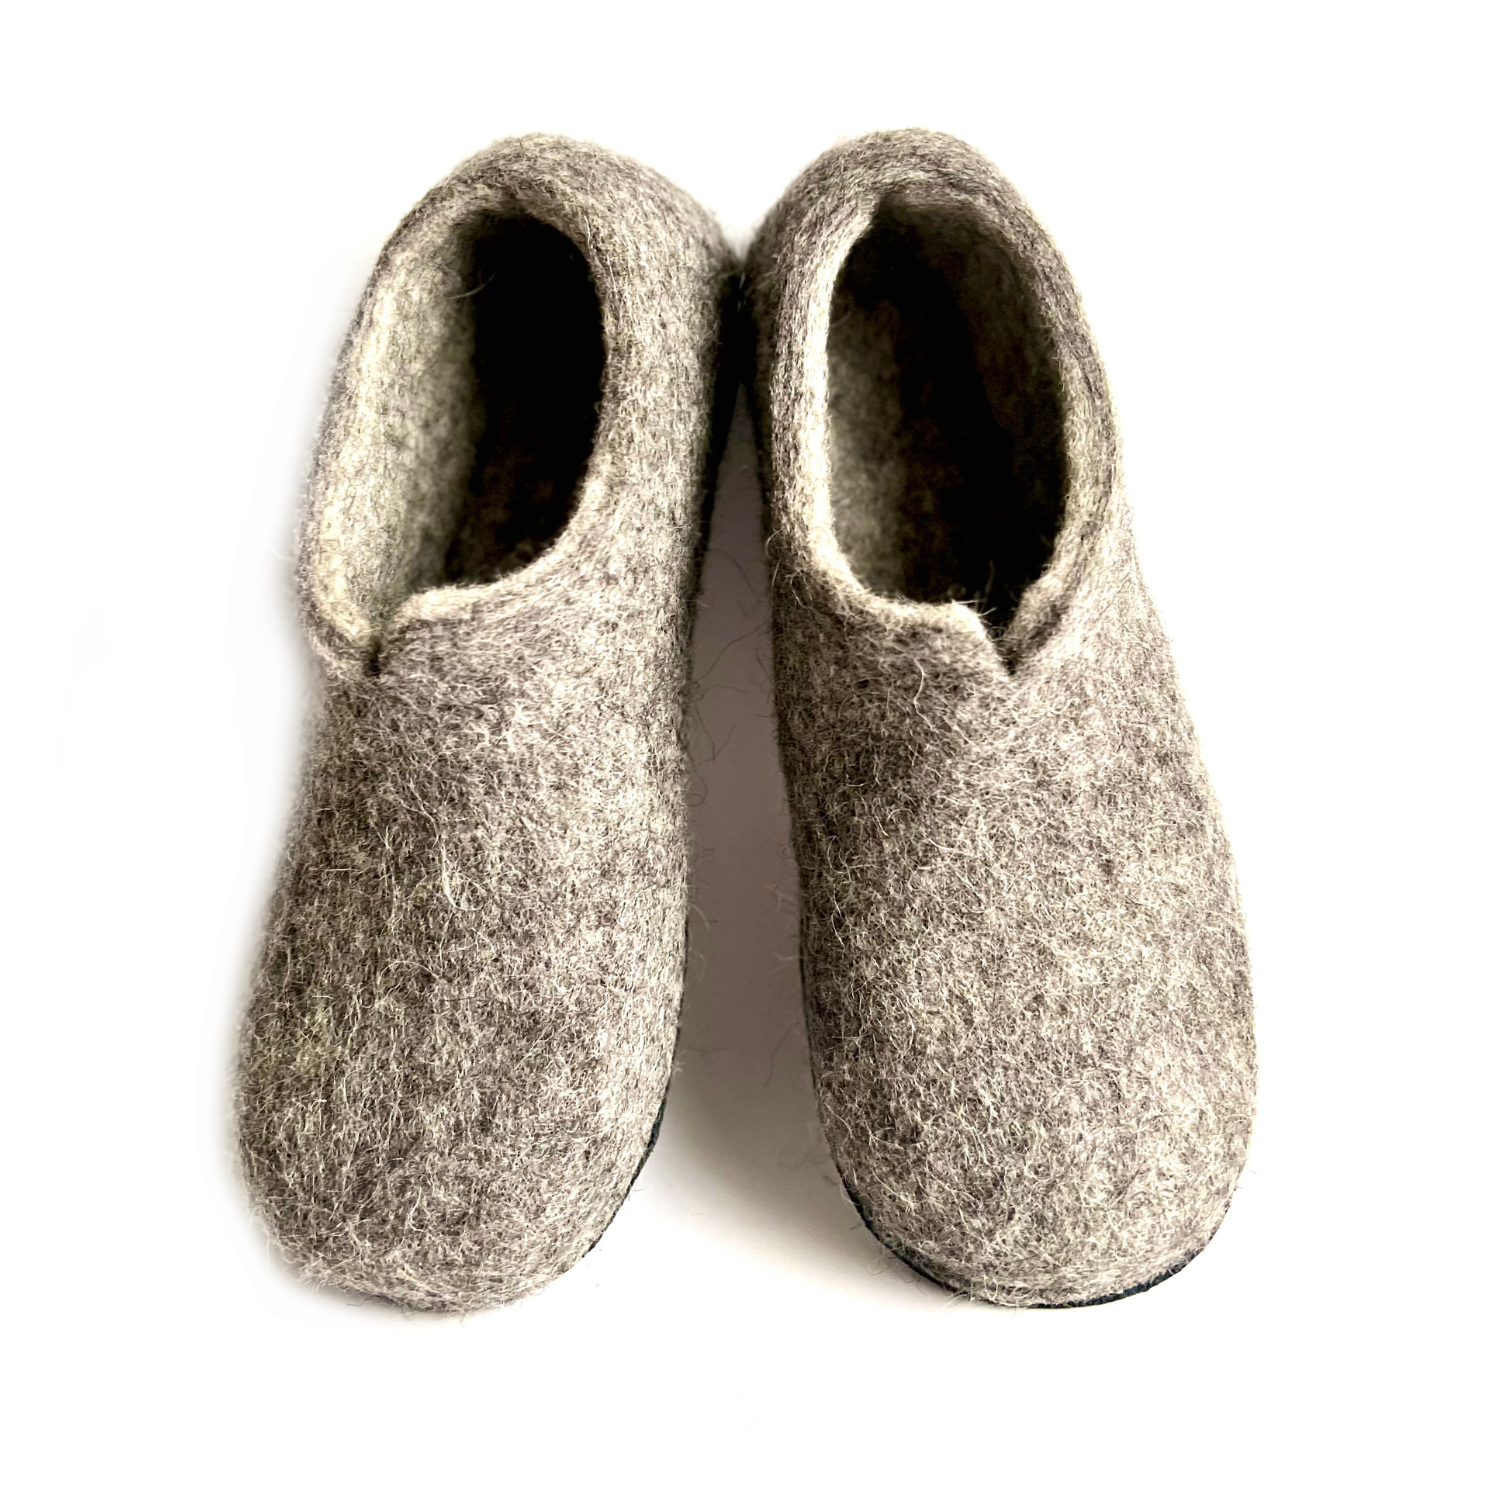 Eco Wool Slippers Minimalist Gray Shades FELTFORMA Barefoot shoes gifts .png